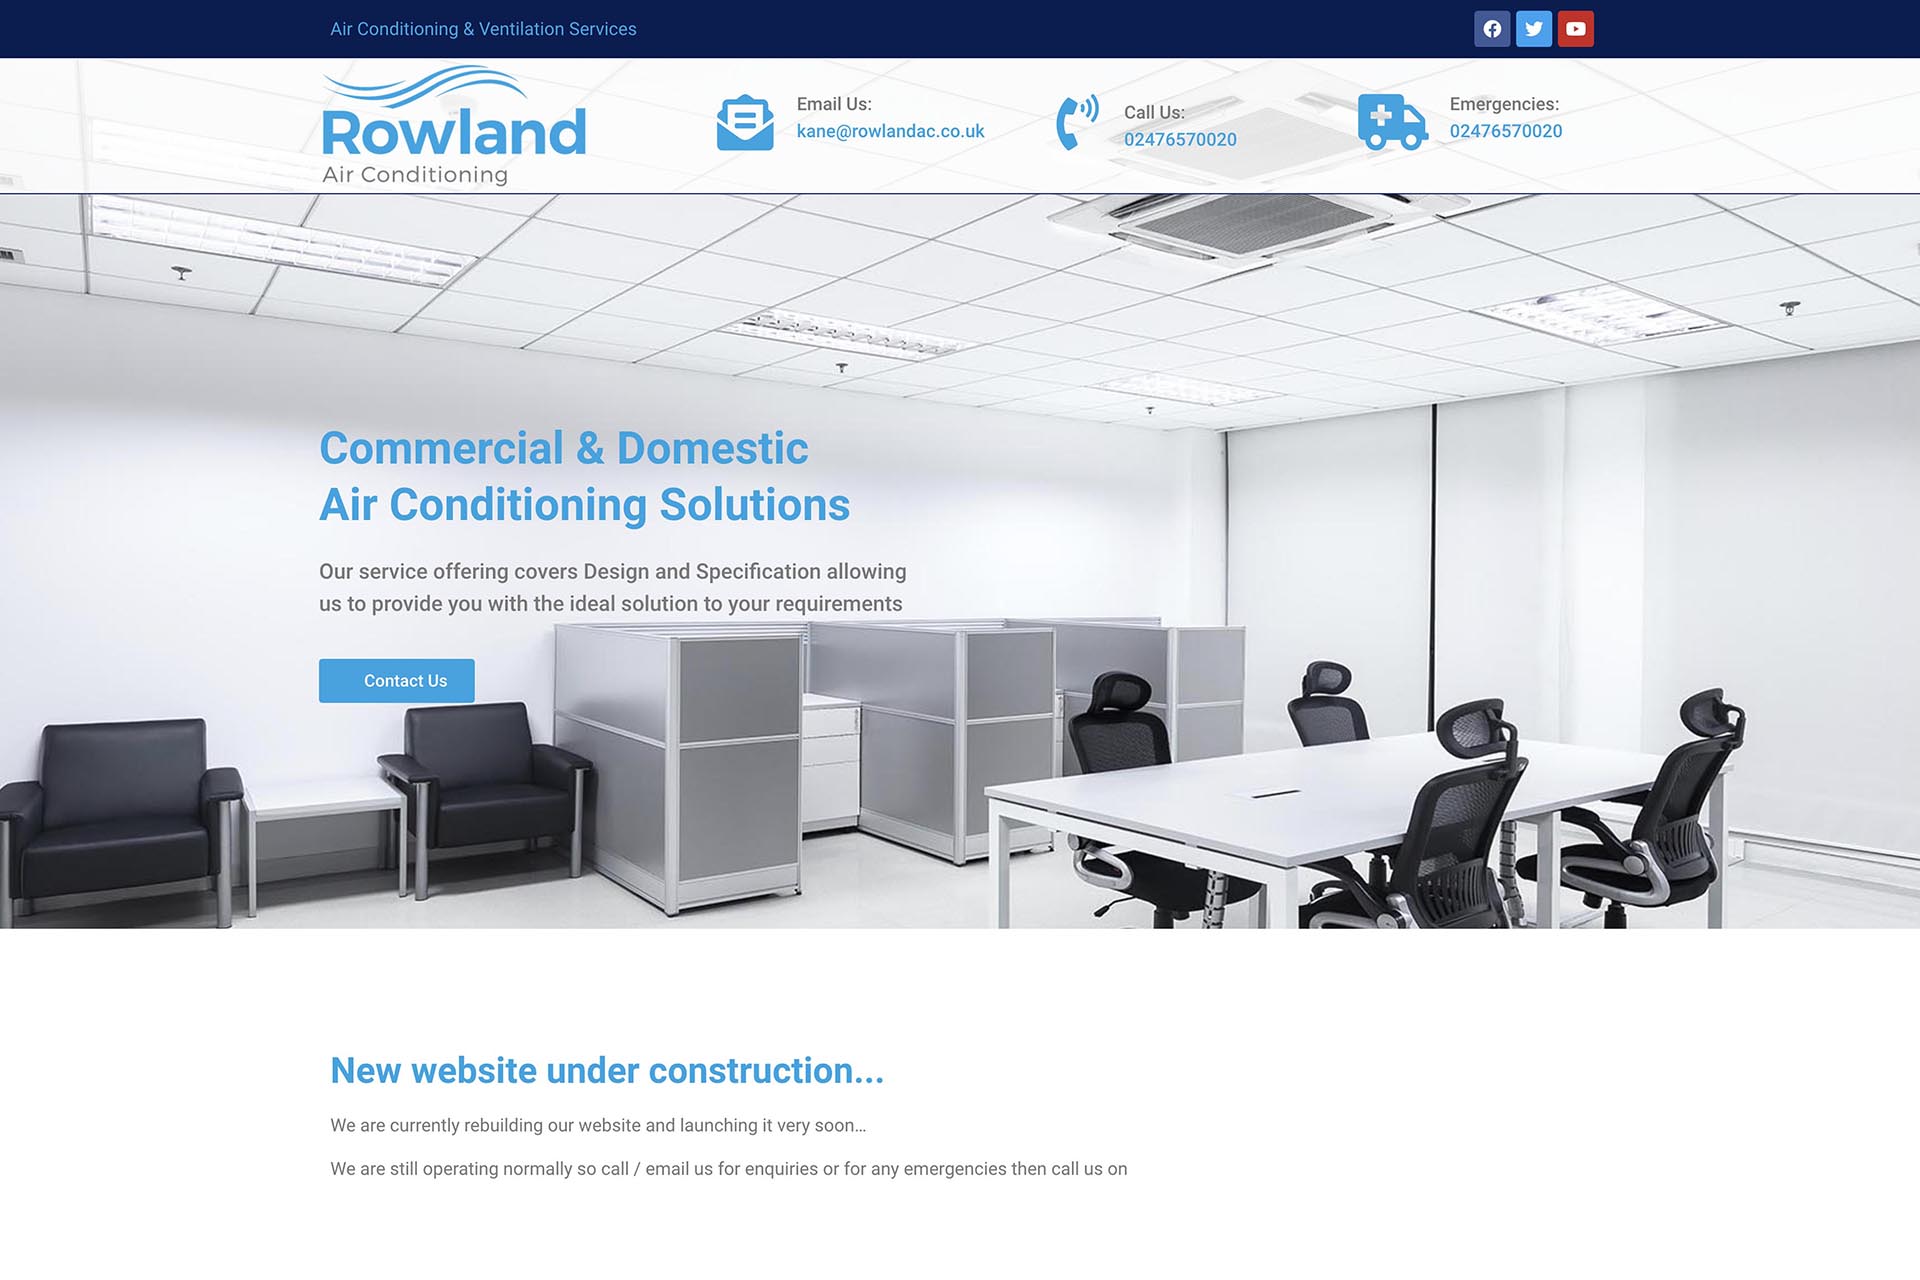 Rowland Air Conditioning